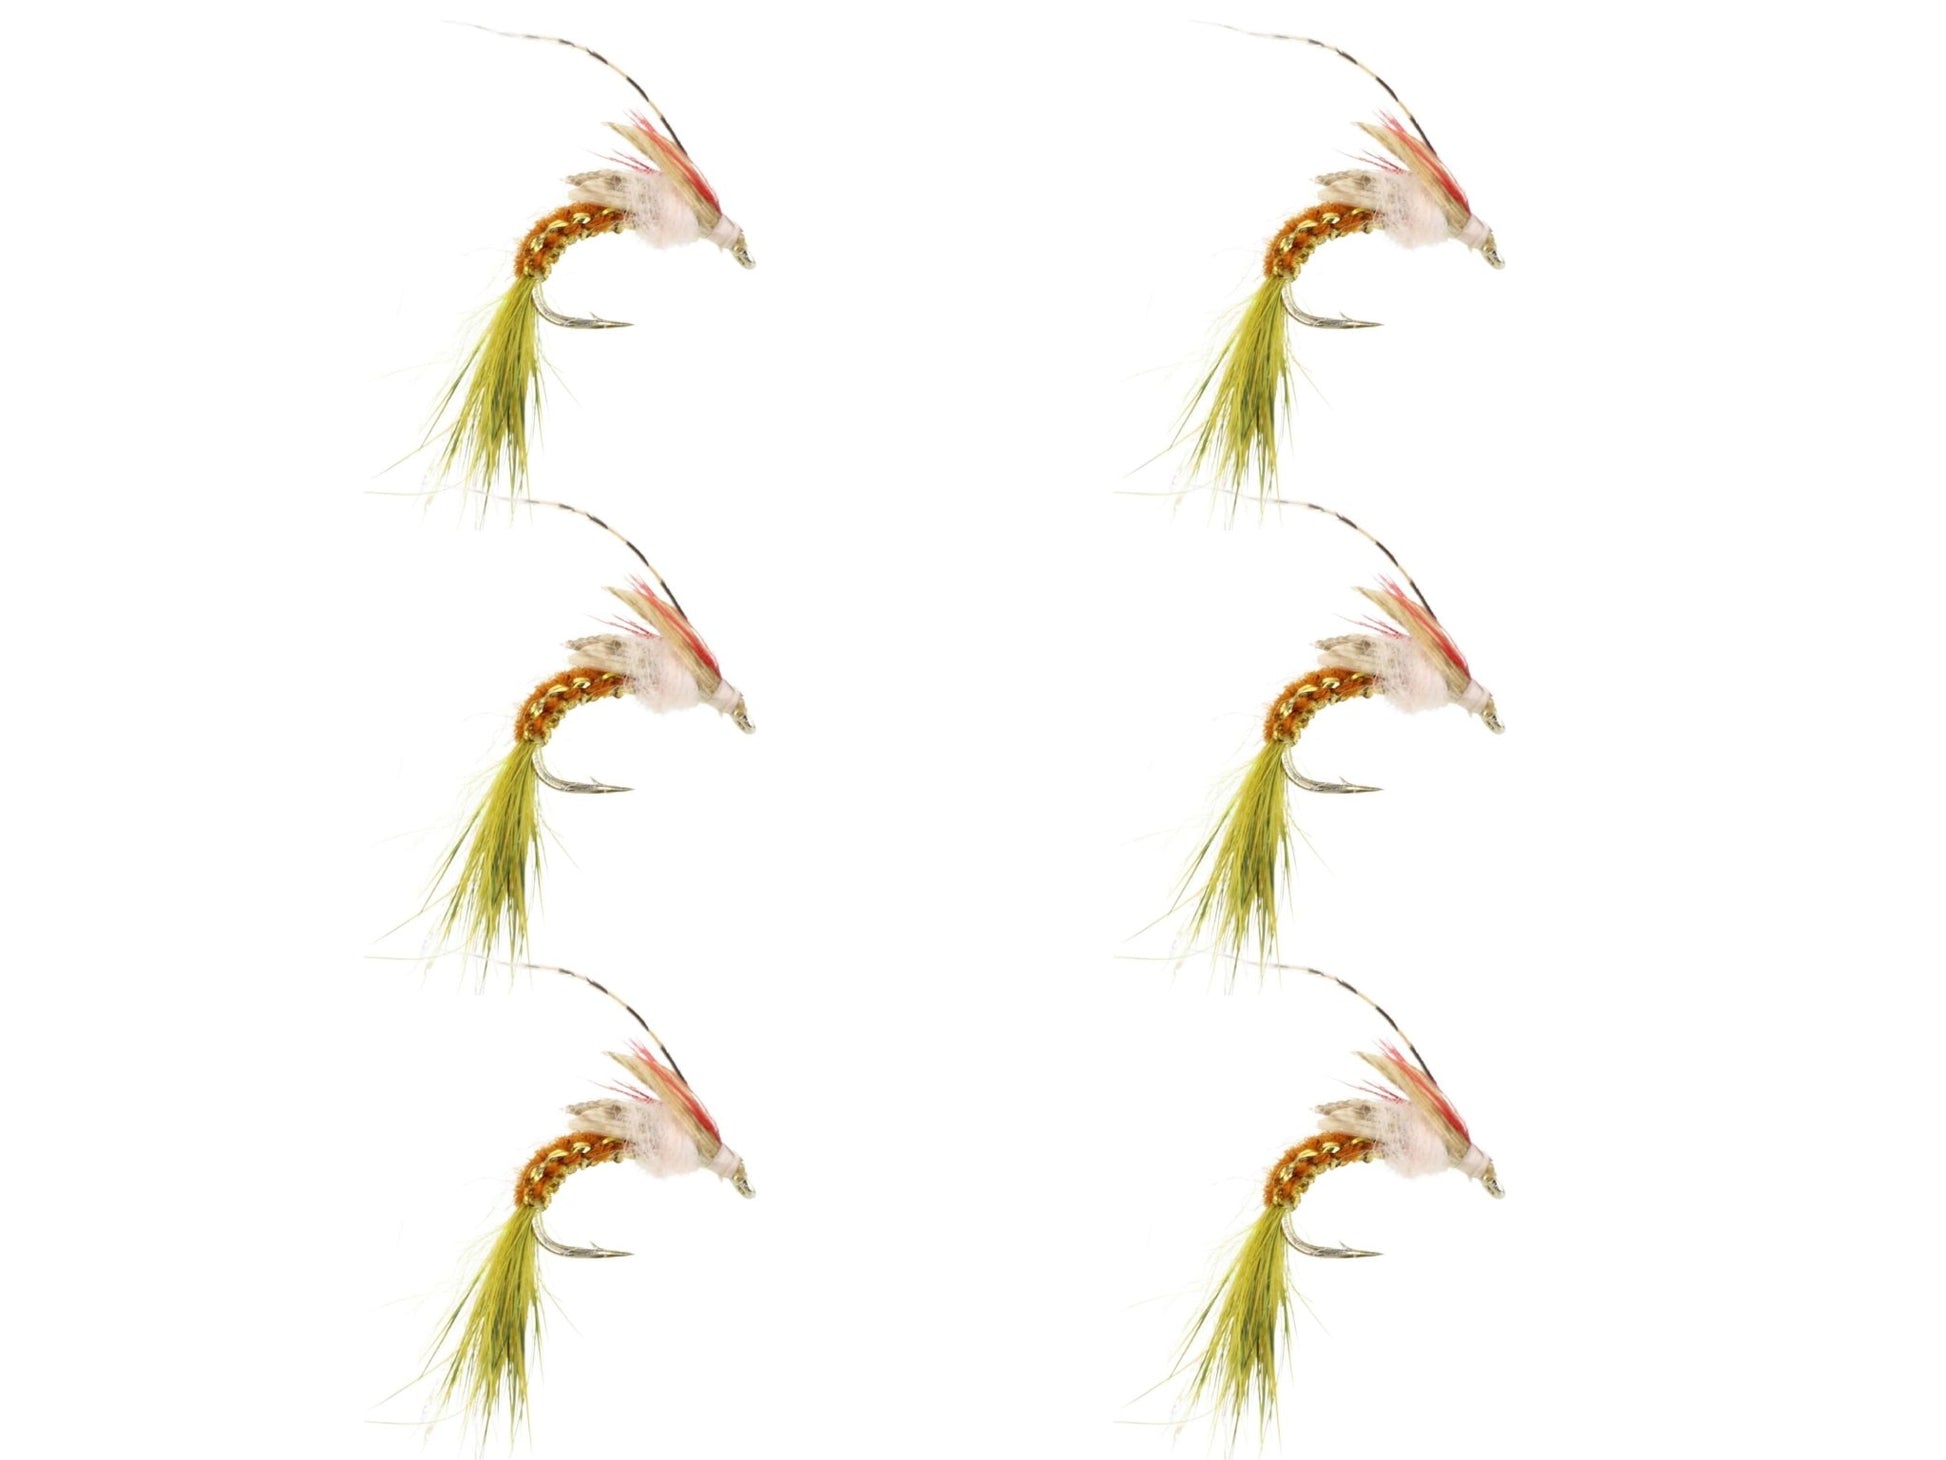 Wild Water Fly Fishing Woven Brown and Olive Caddis, Size 10, Qty. 6 - Angler's Pro Tackle & Outdoors